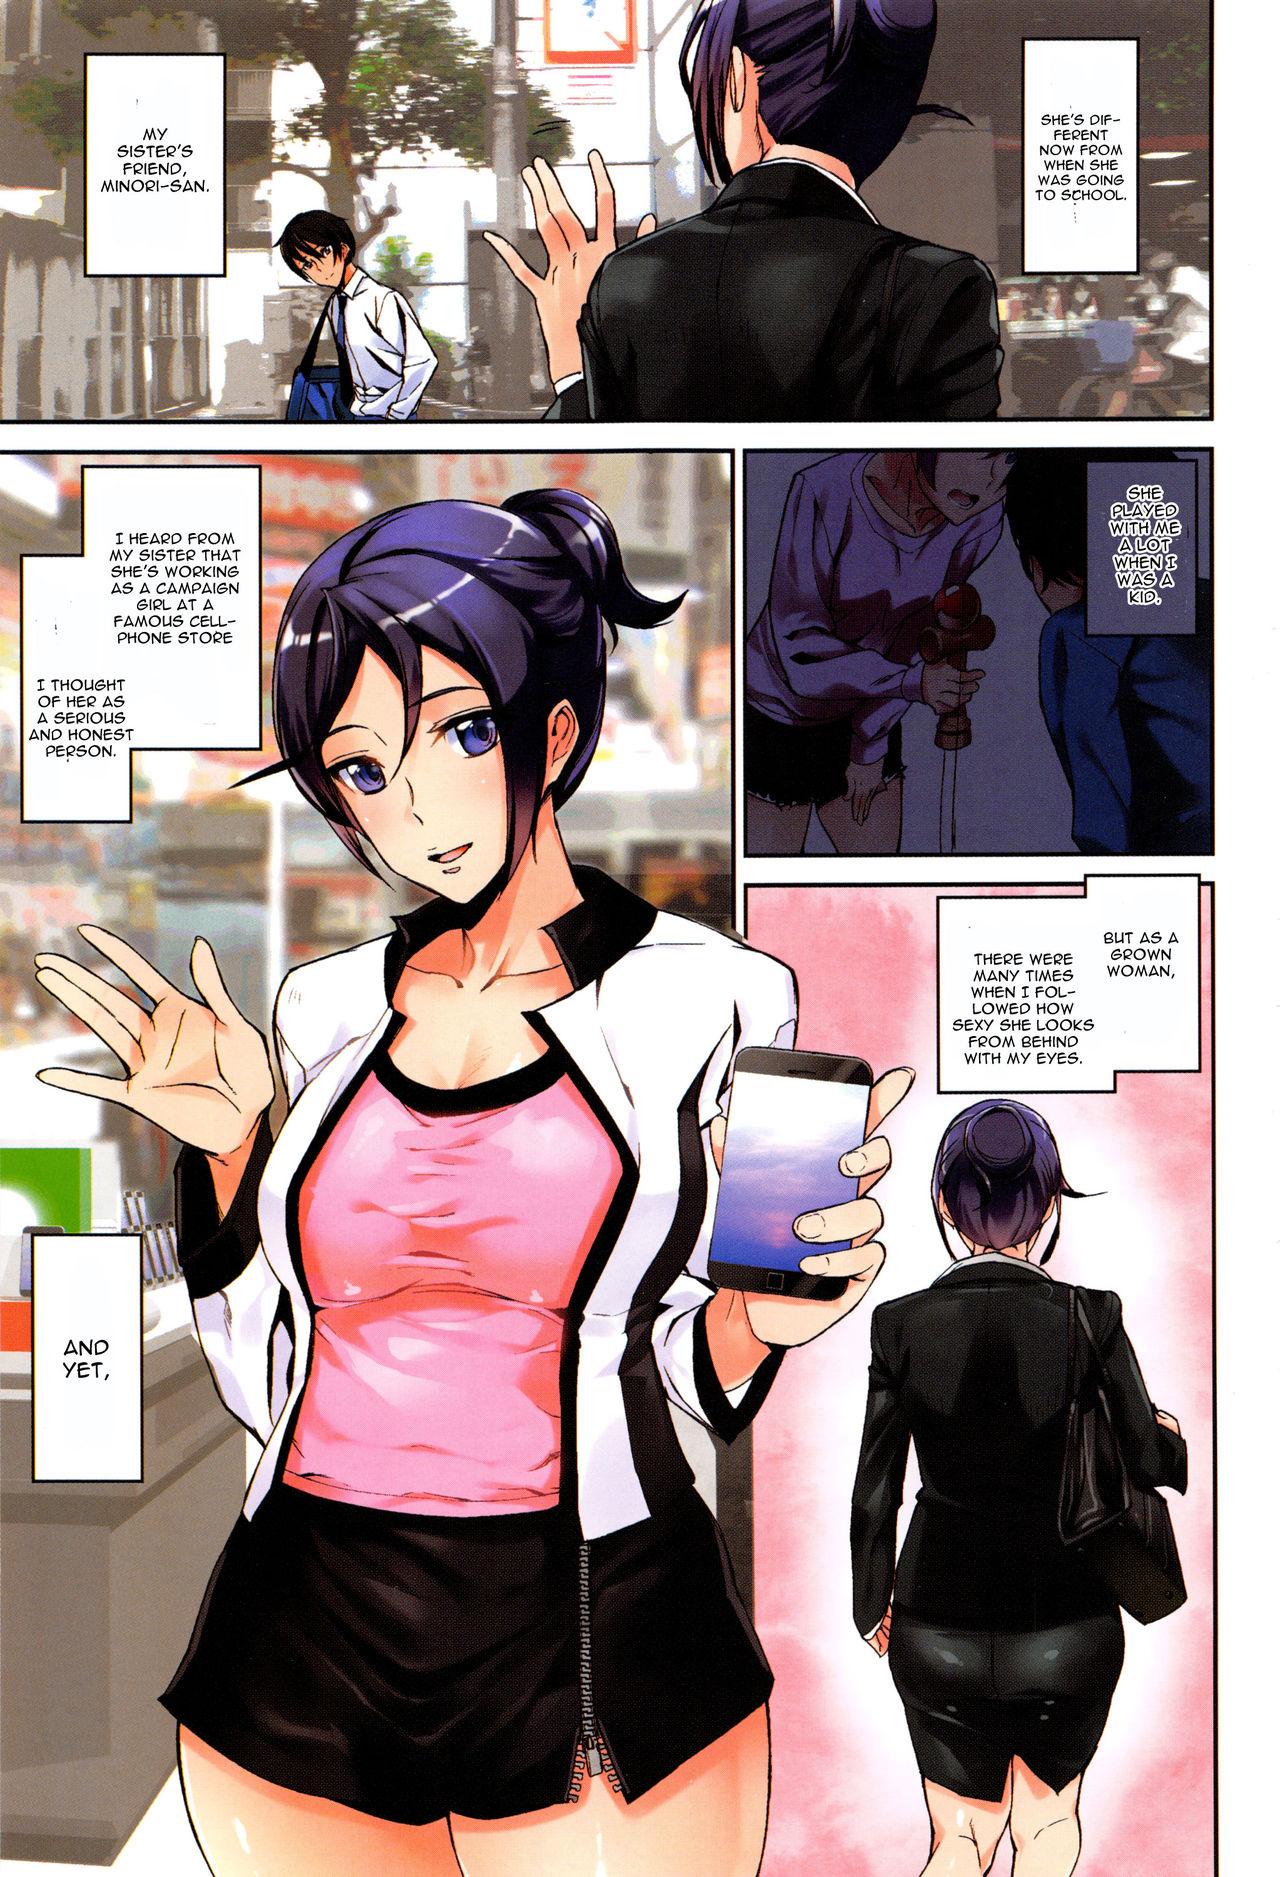 Stockings Crime Girls Ch. 1 Affair - Page 1